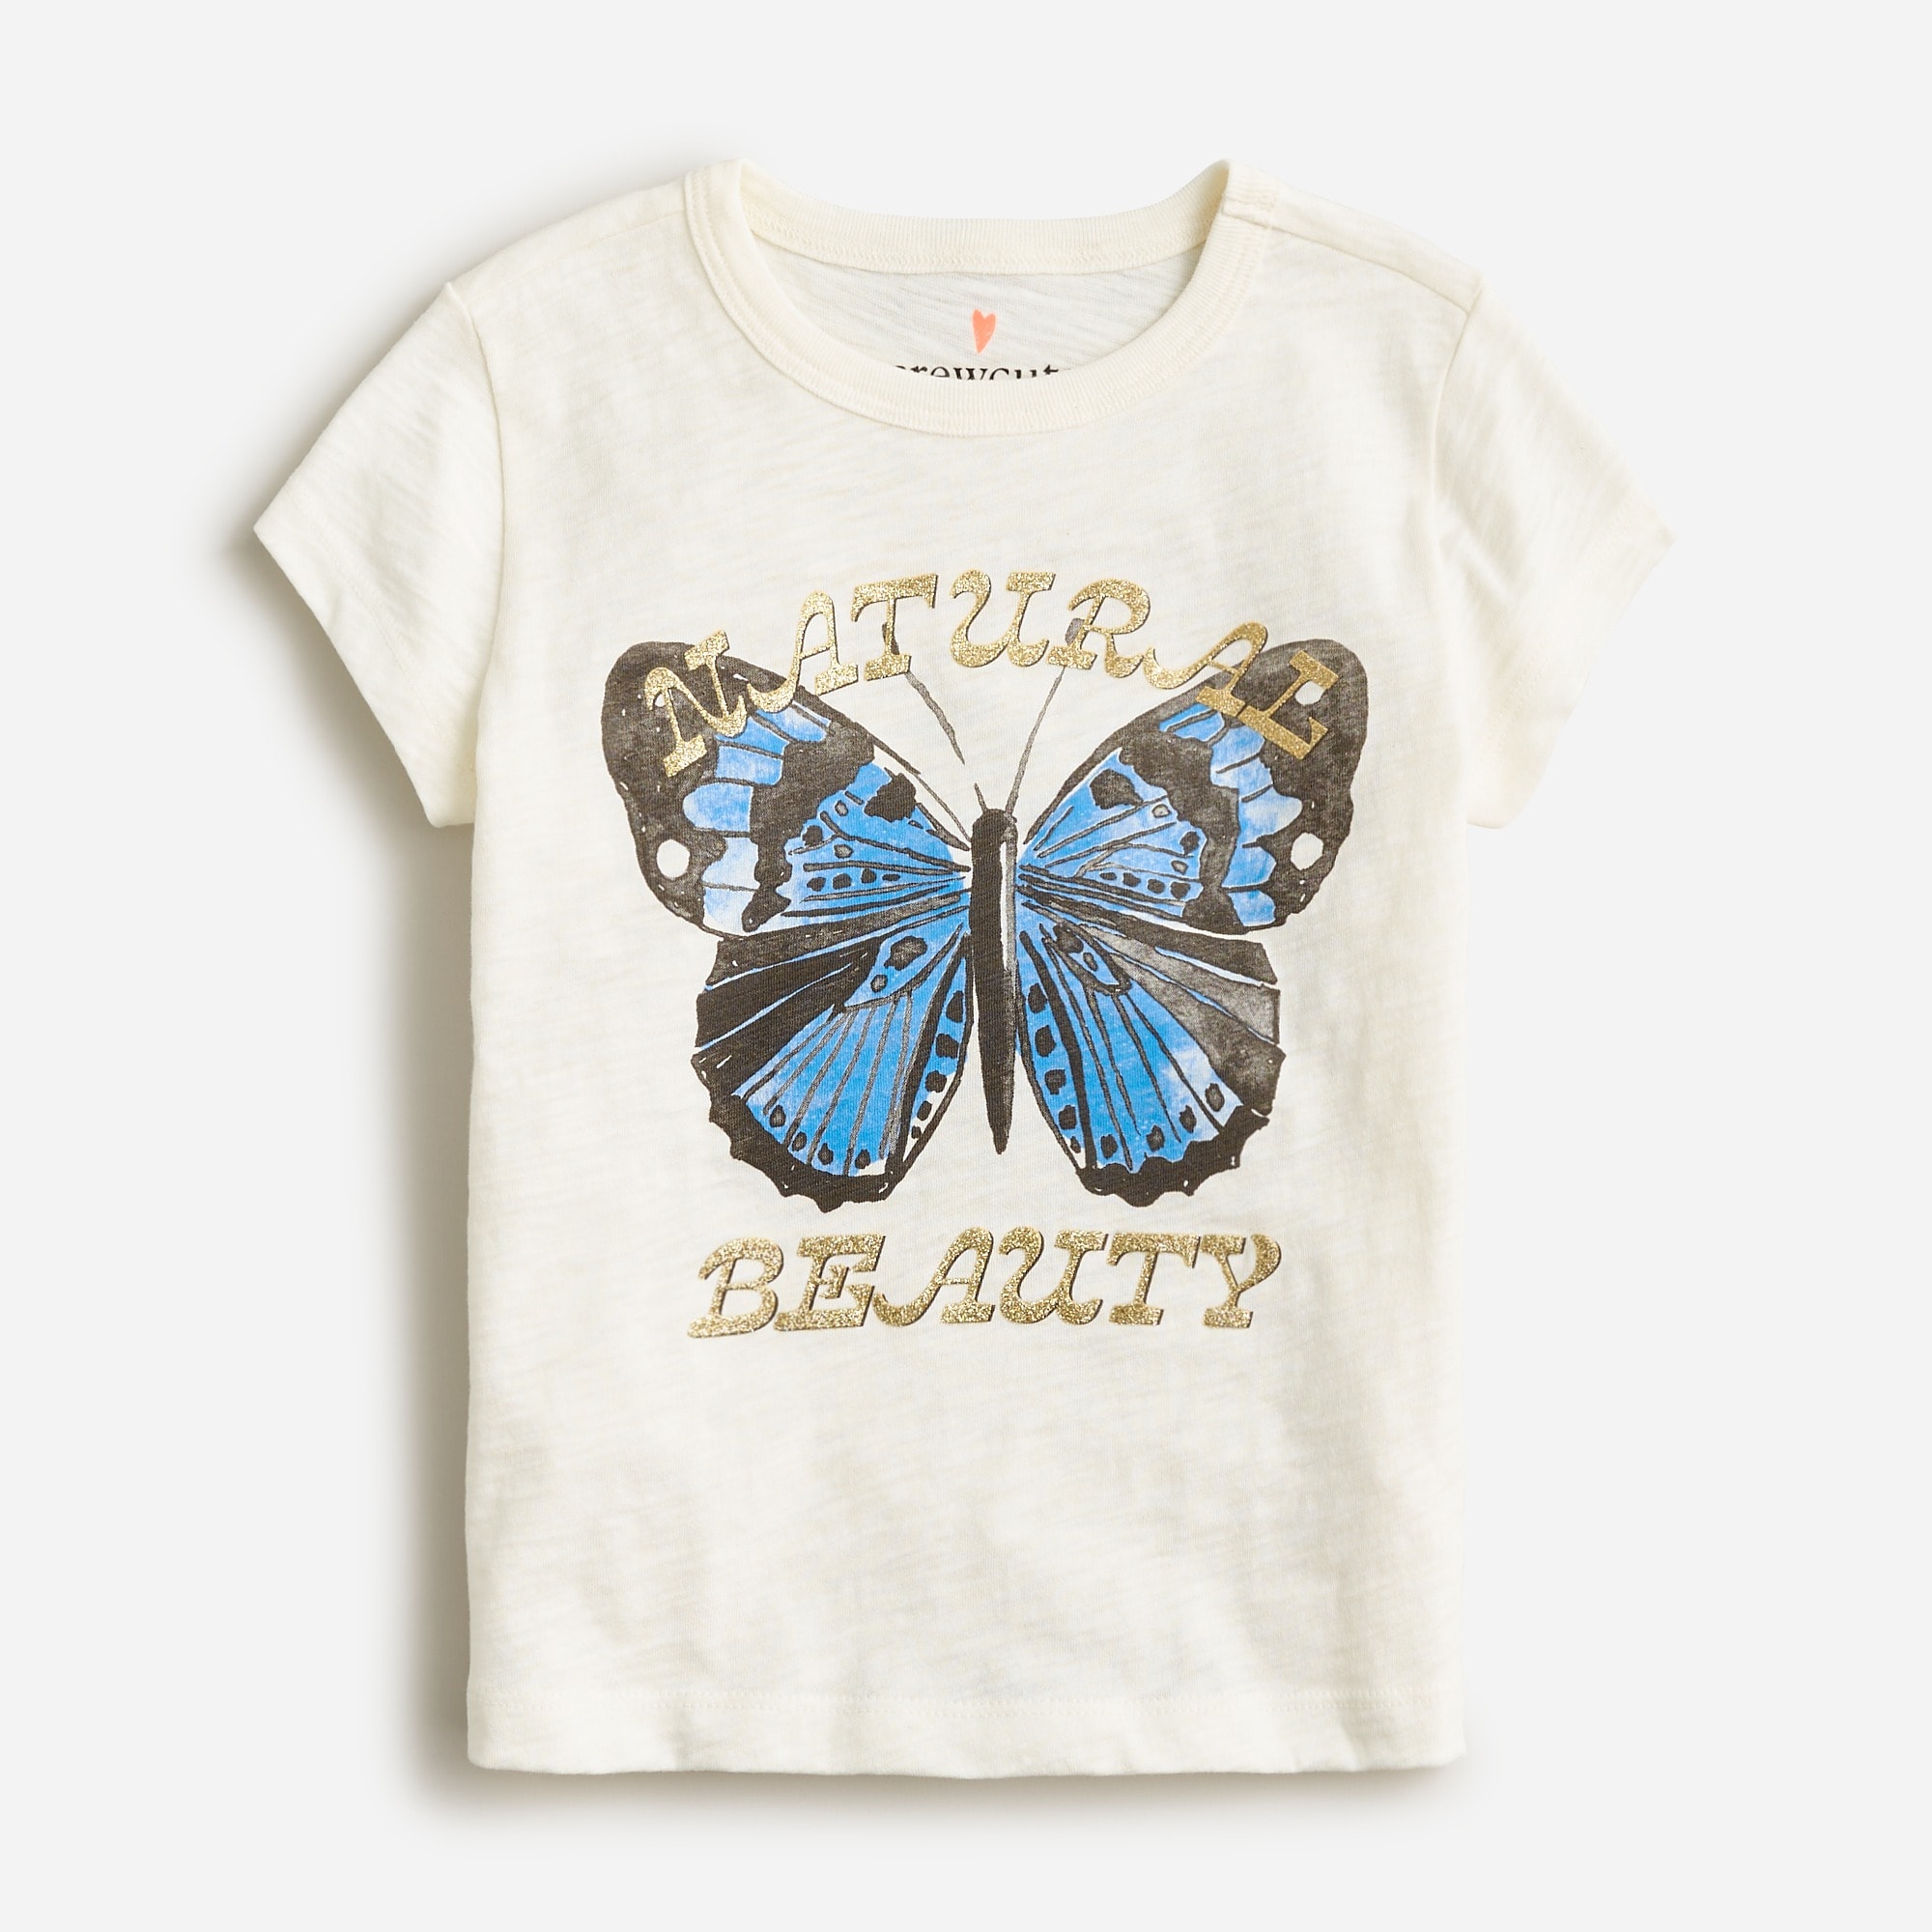  Girls' butterfly graphic T-shirt